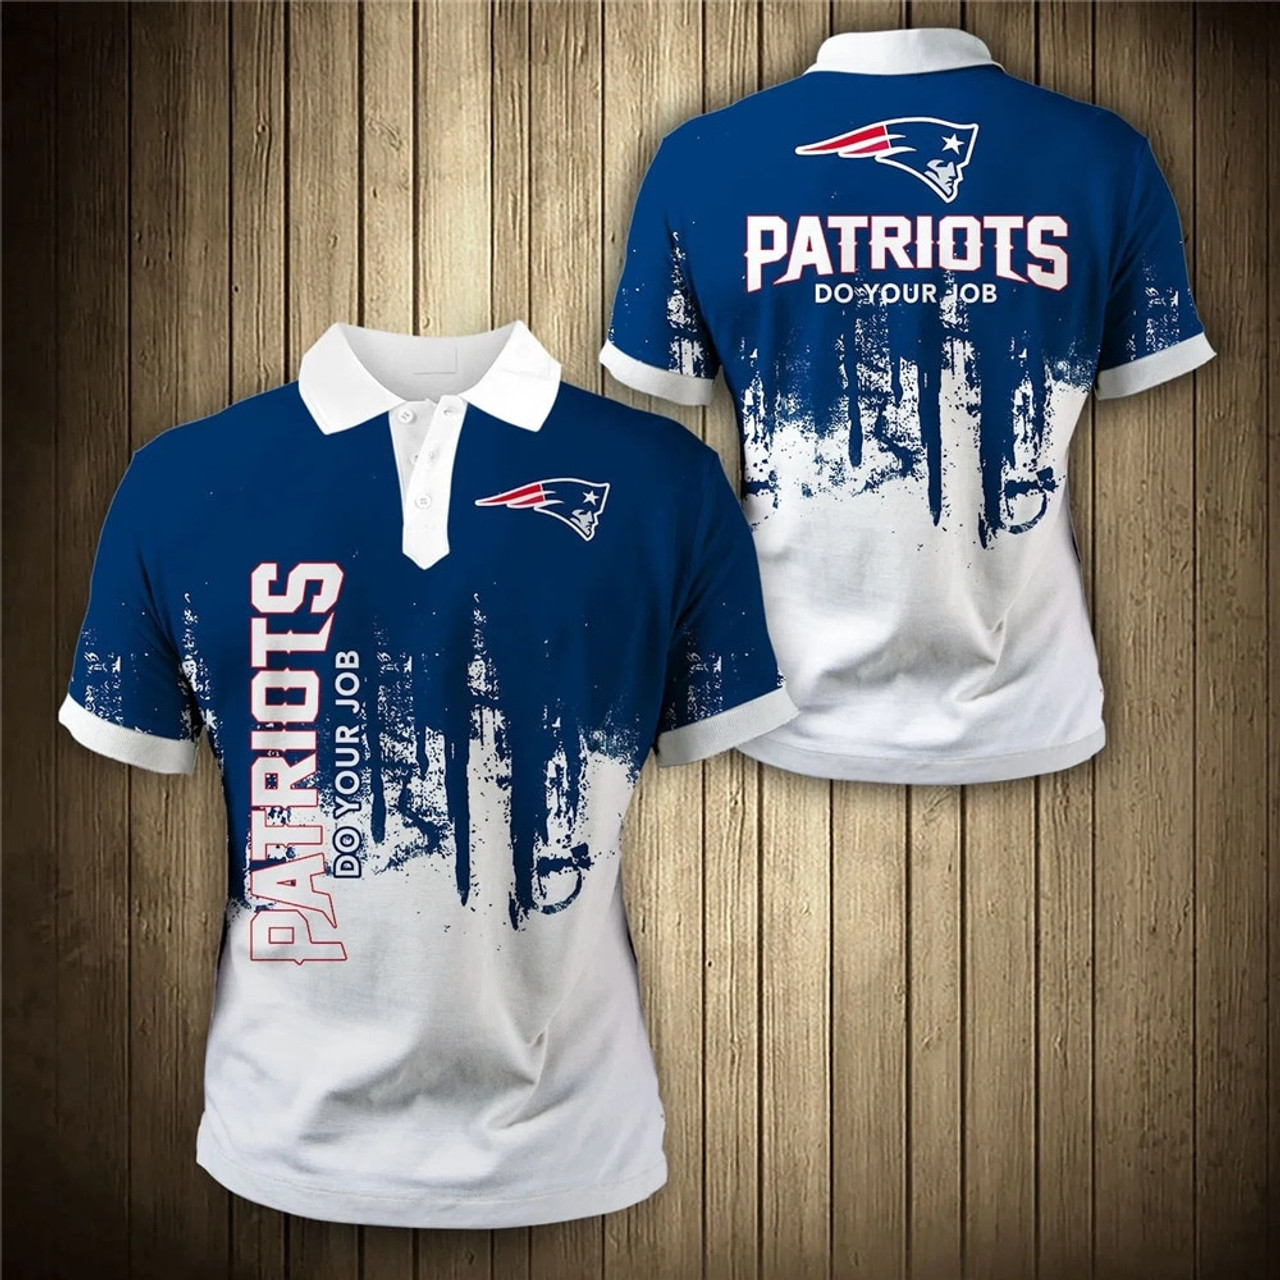  **(OFFICIAL-N.F.L.NEW-ENGLAND-PATRIOTS-TRENDY-TEAM-POLO-SHIRTS/CUSTOM-3D-PATRIOTS-OFFICIAL-LOGOS & OFFICIAL-CLASSIC-PATRIOTS-TEAM-COLORS/CUSTOM-DETAILED-3D-GRAPHIC-PRINTED-DOUBLE-SIDED-DESIGN/PREMIUM-N.F.L.PATRIOTS-TEAM-FASHION-POLO-SHIRTS)**